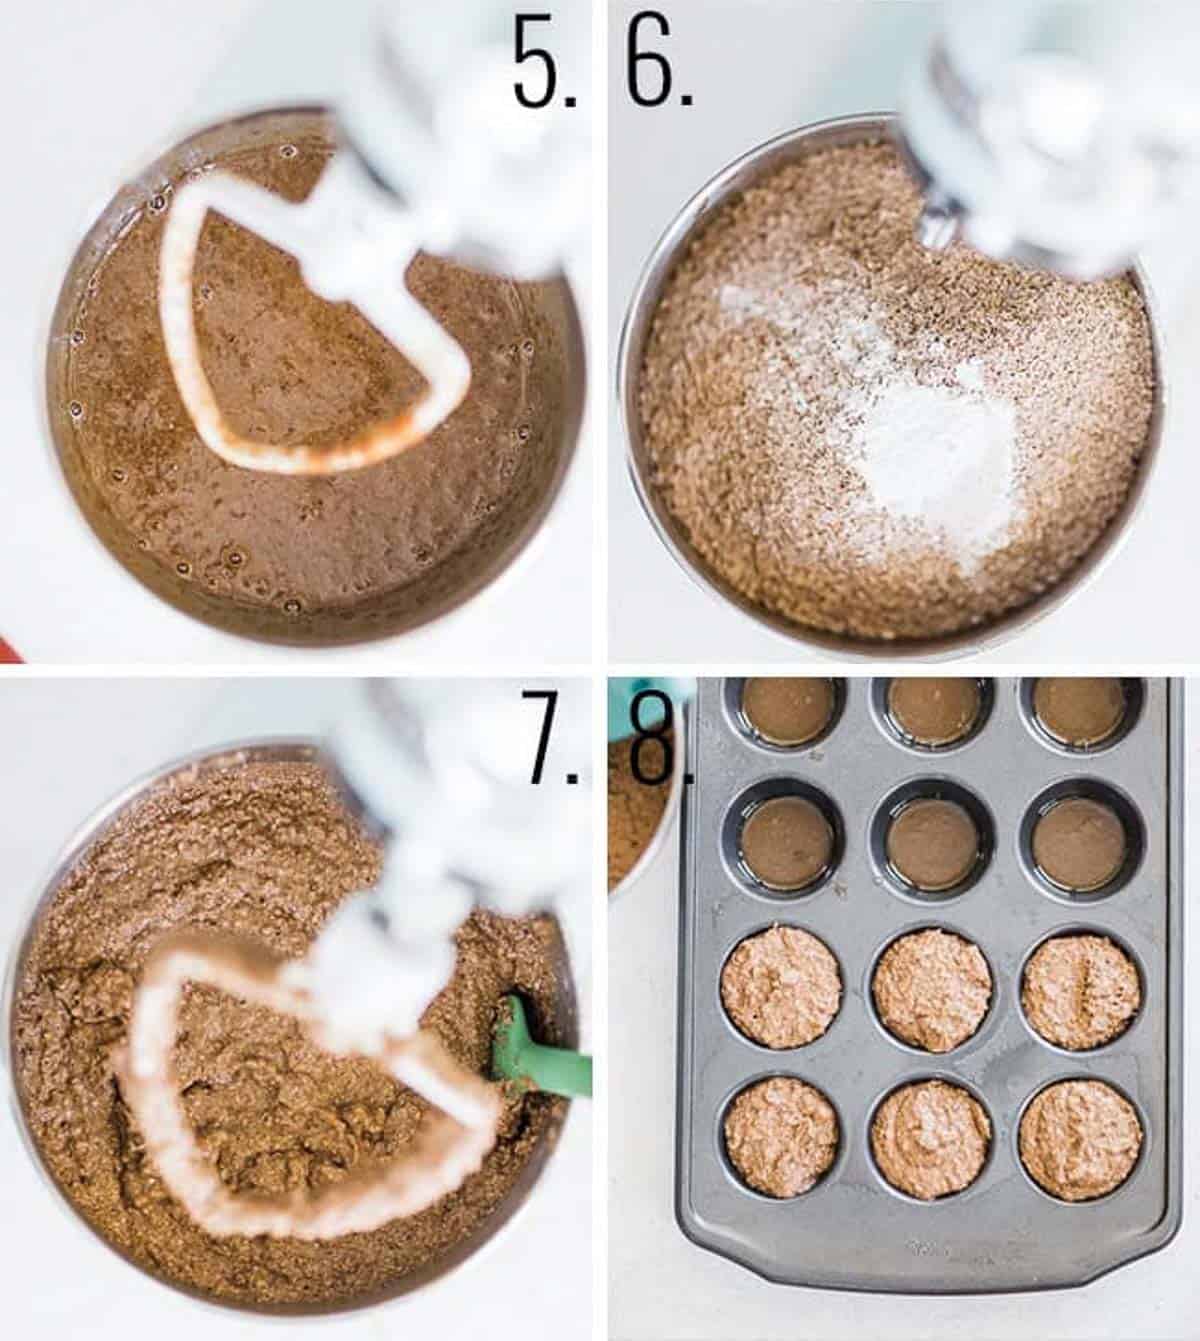 Collage of images showing using a stand mixer to make bran muffins.